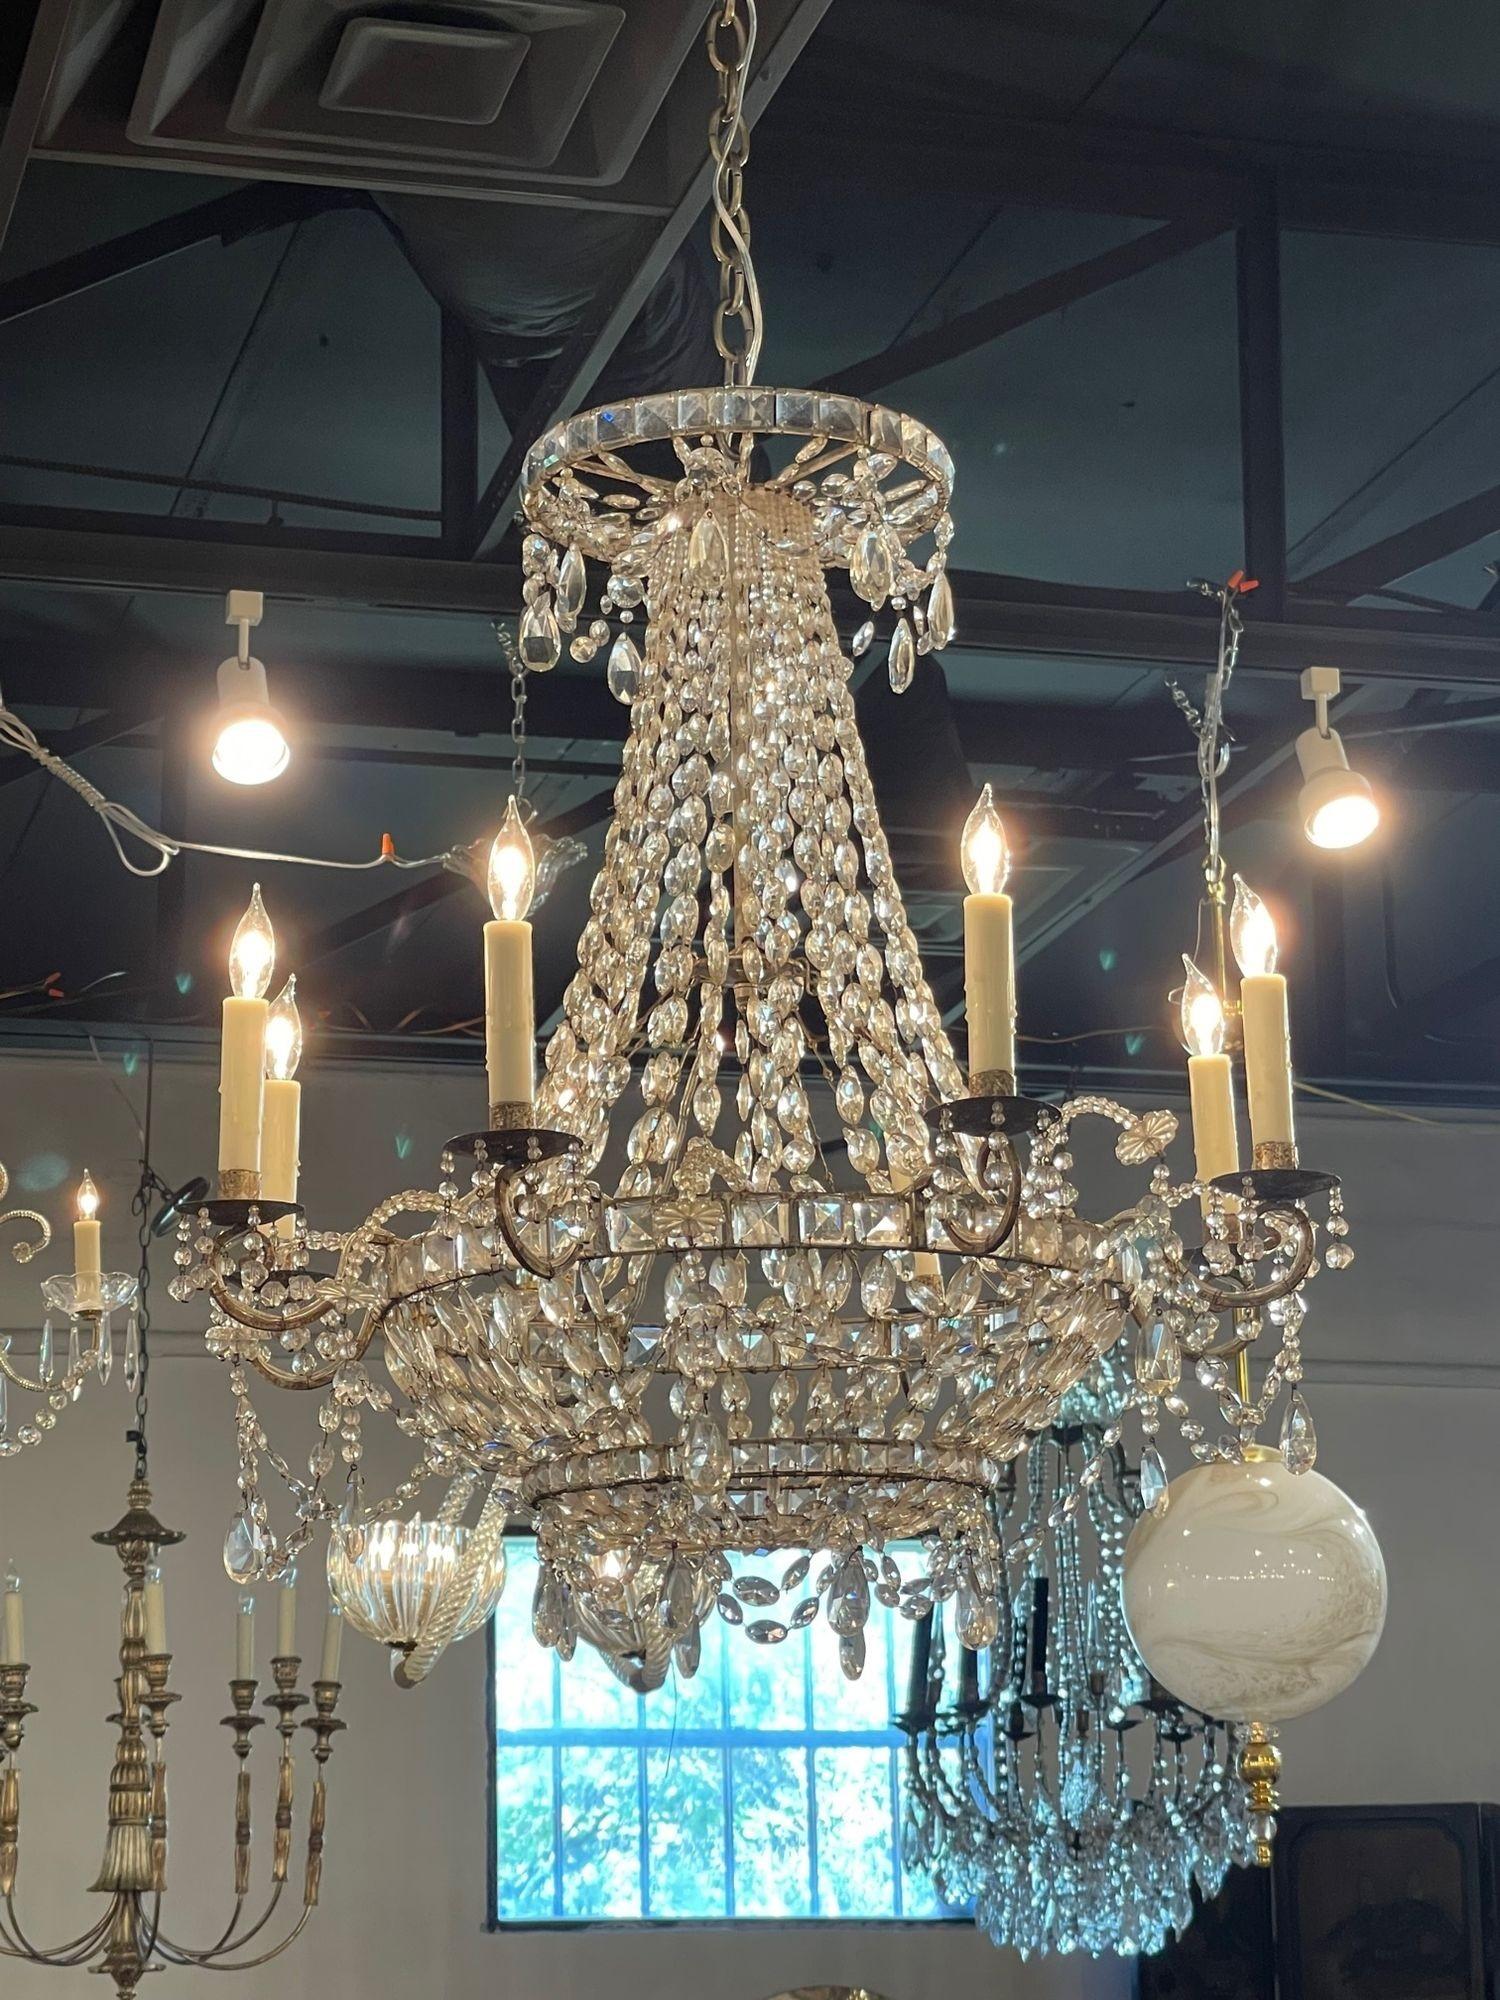 Lovely pair of 18th century Italian 8 light crystal chandeliers. These are covered in gorgeous crystals. Very impressive for a fine home!